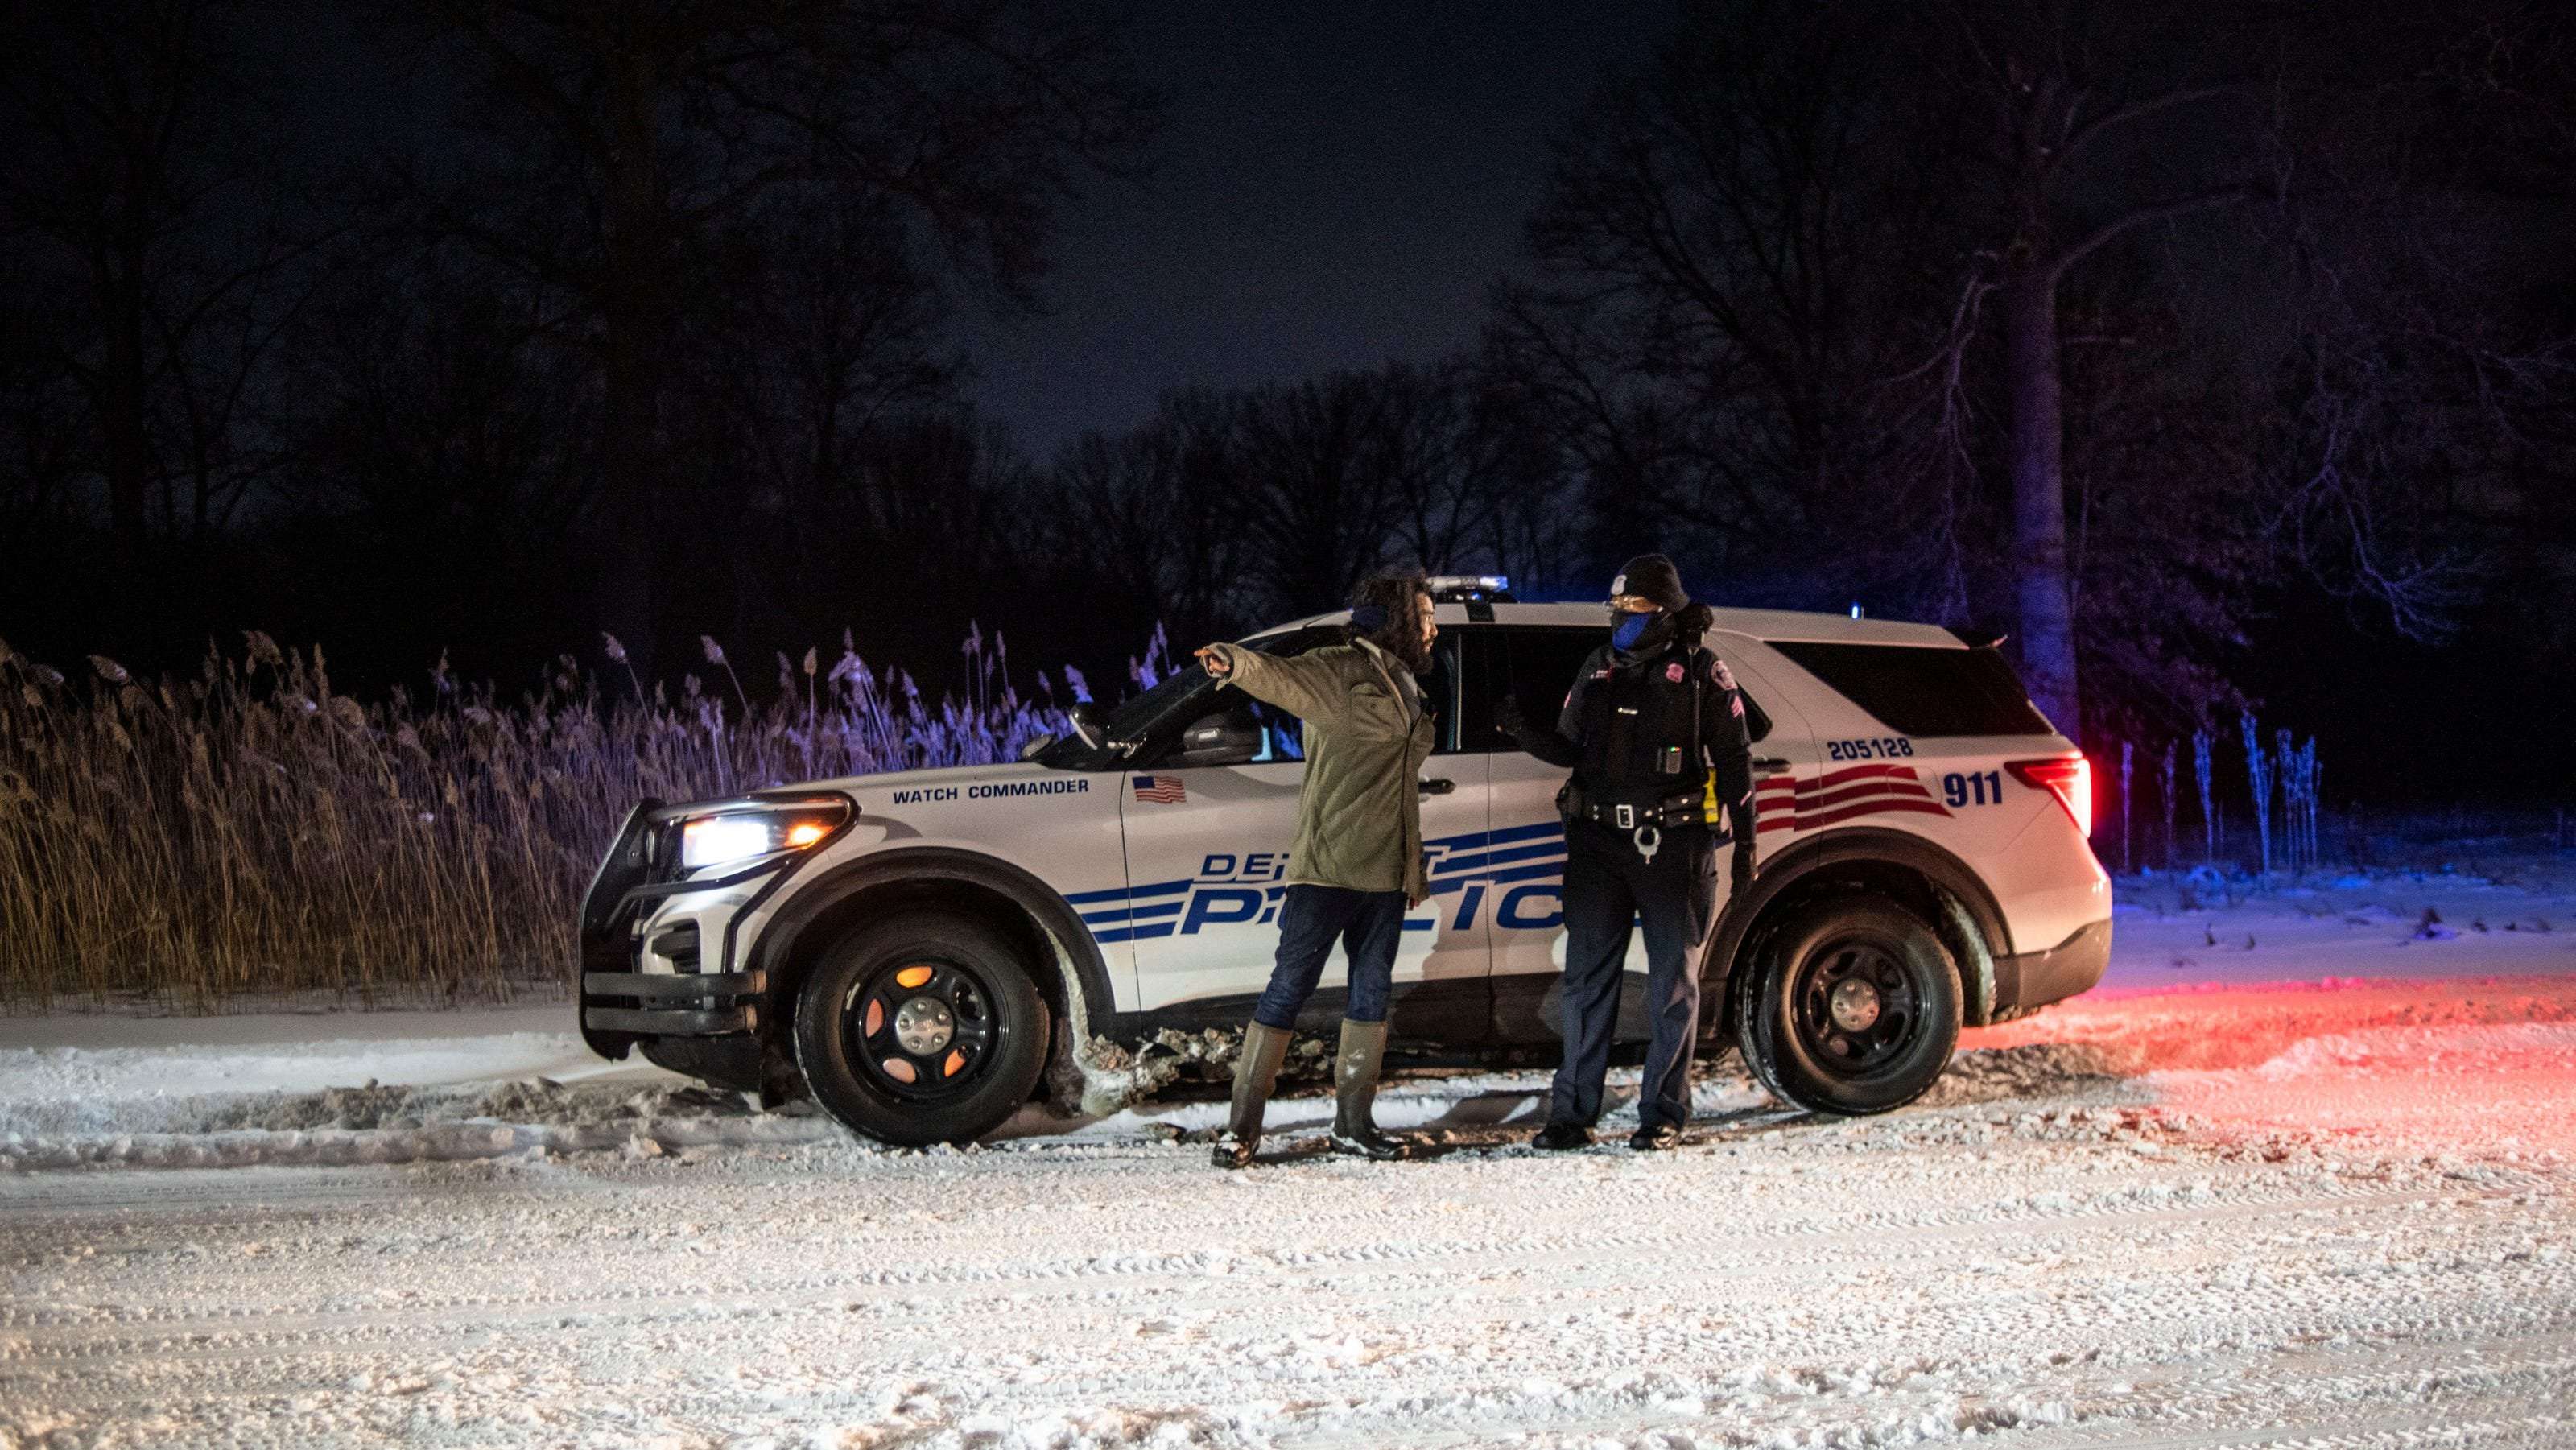 image for Detroit police break up Native sugarbush ceremony, saying 'sovereign stuff is not valid'